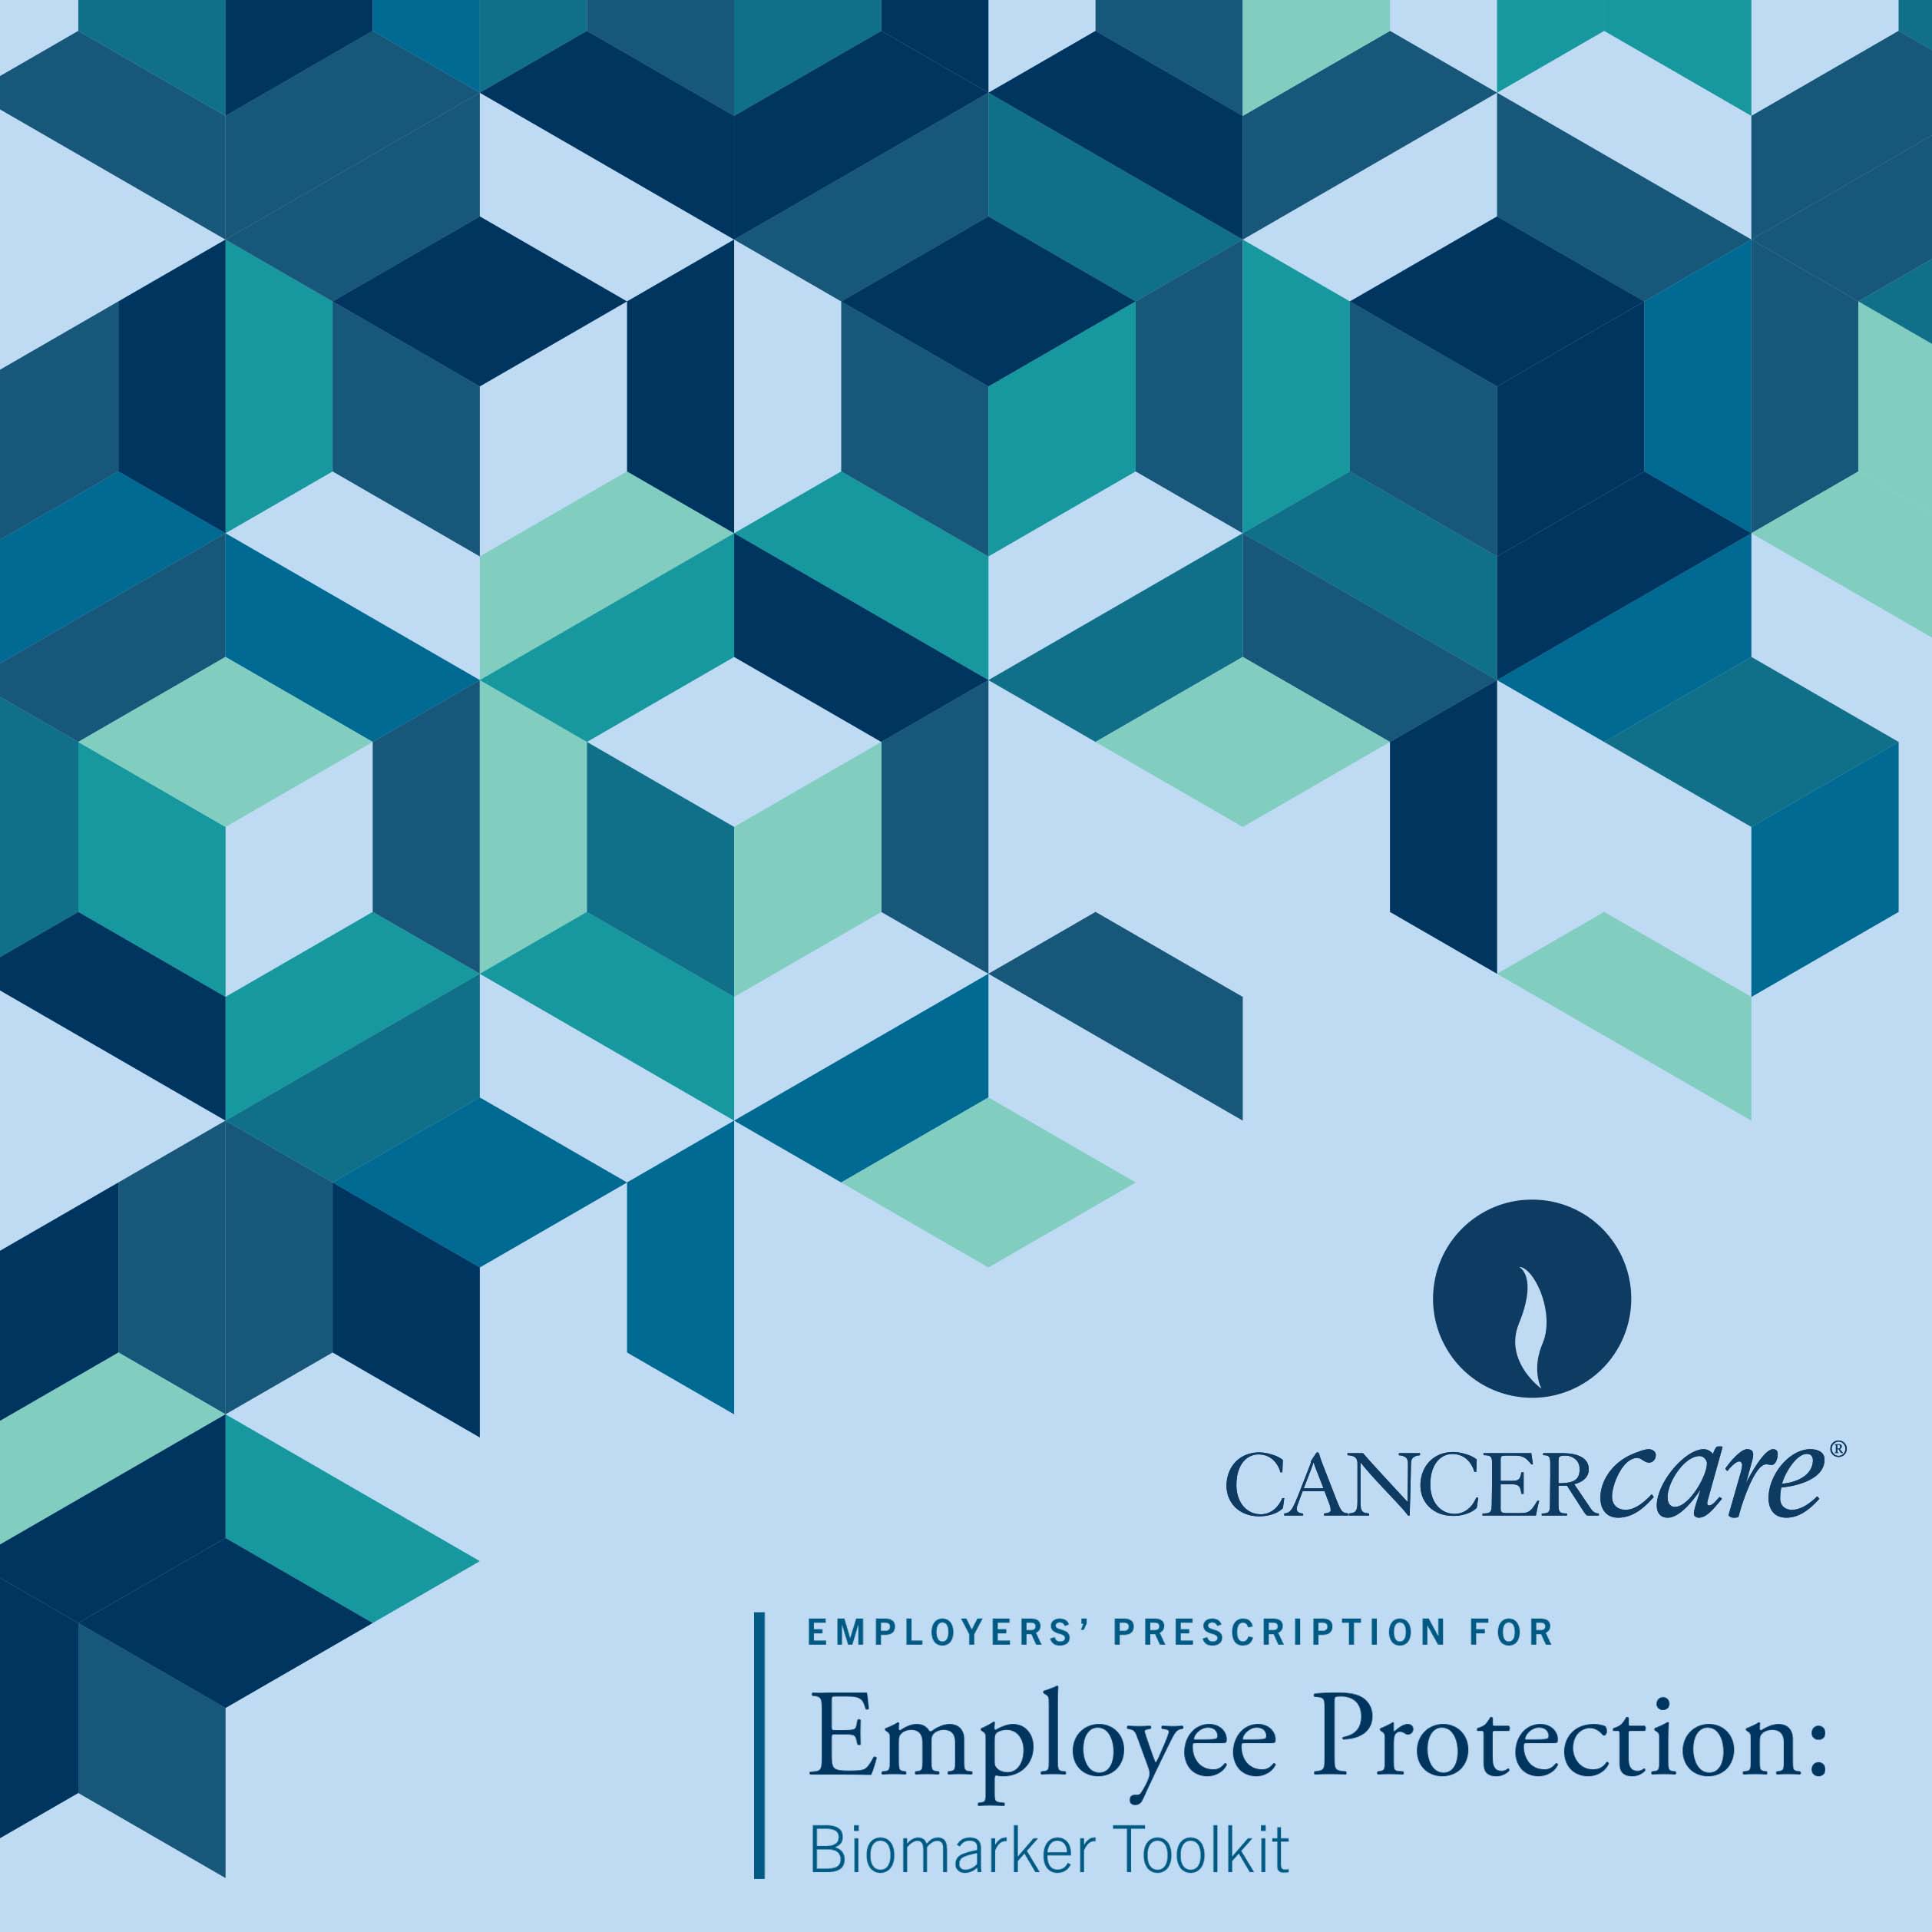 Learn about our Employers’ Prescription for Employee Protection: Biomarker Toolkit » feature